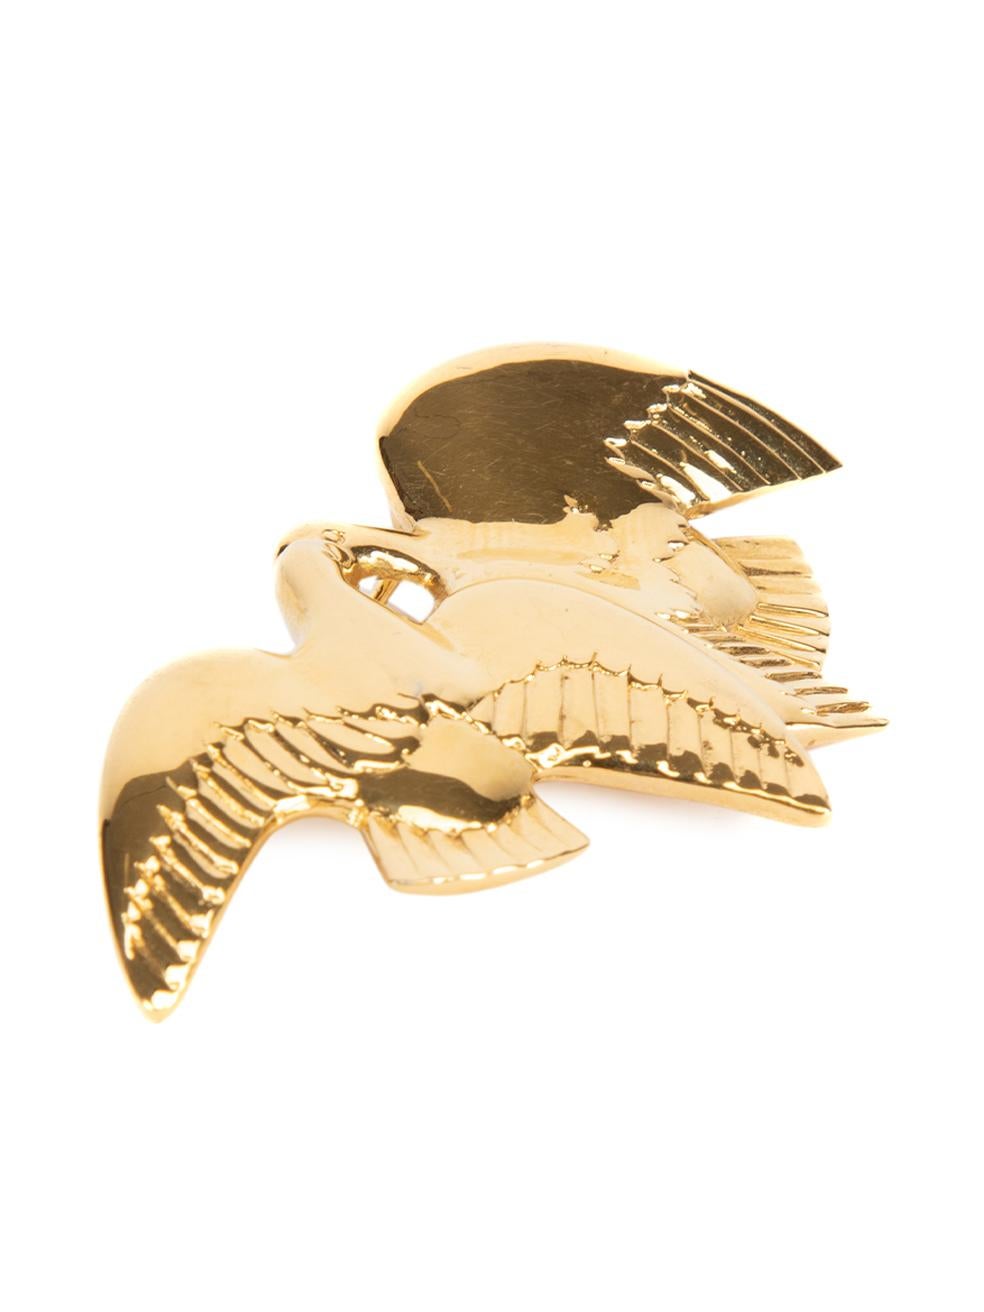 CONDITION is Very good. Minimal wear to brooch is evident. Minimal scuffs seen to gold on this used Nina Ricci designer resale item. Details Gold Metal Dove brooch Pin clasp with safety hook Composition Metal Size & Fit Height: 3. 5cm/1in Width: